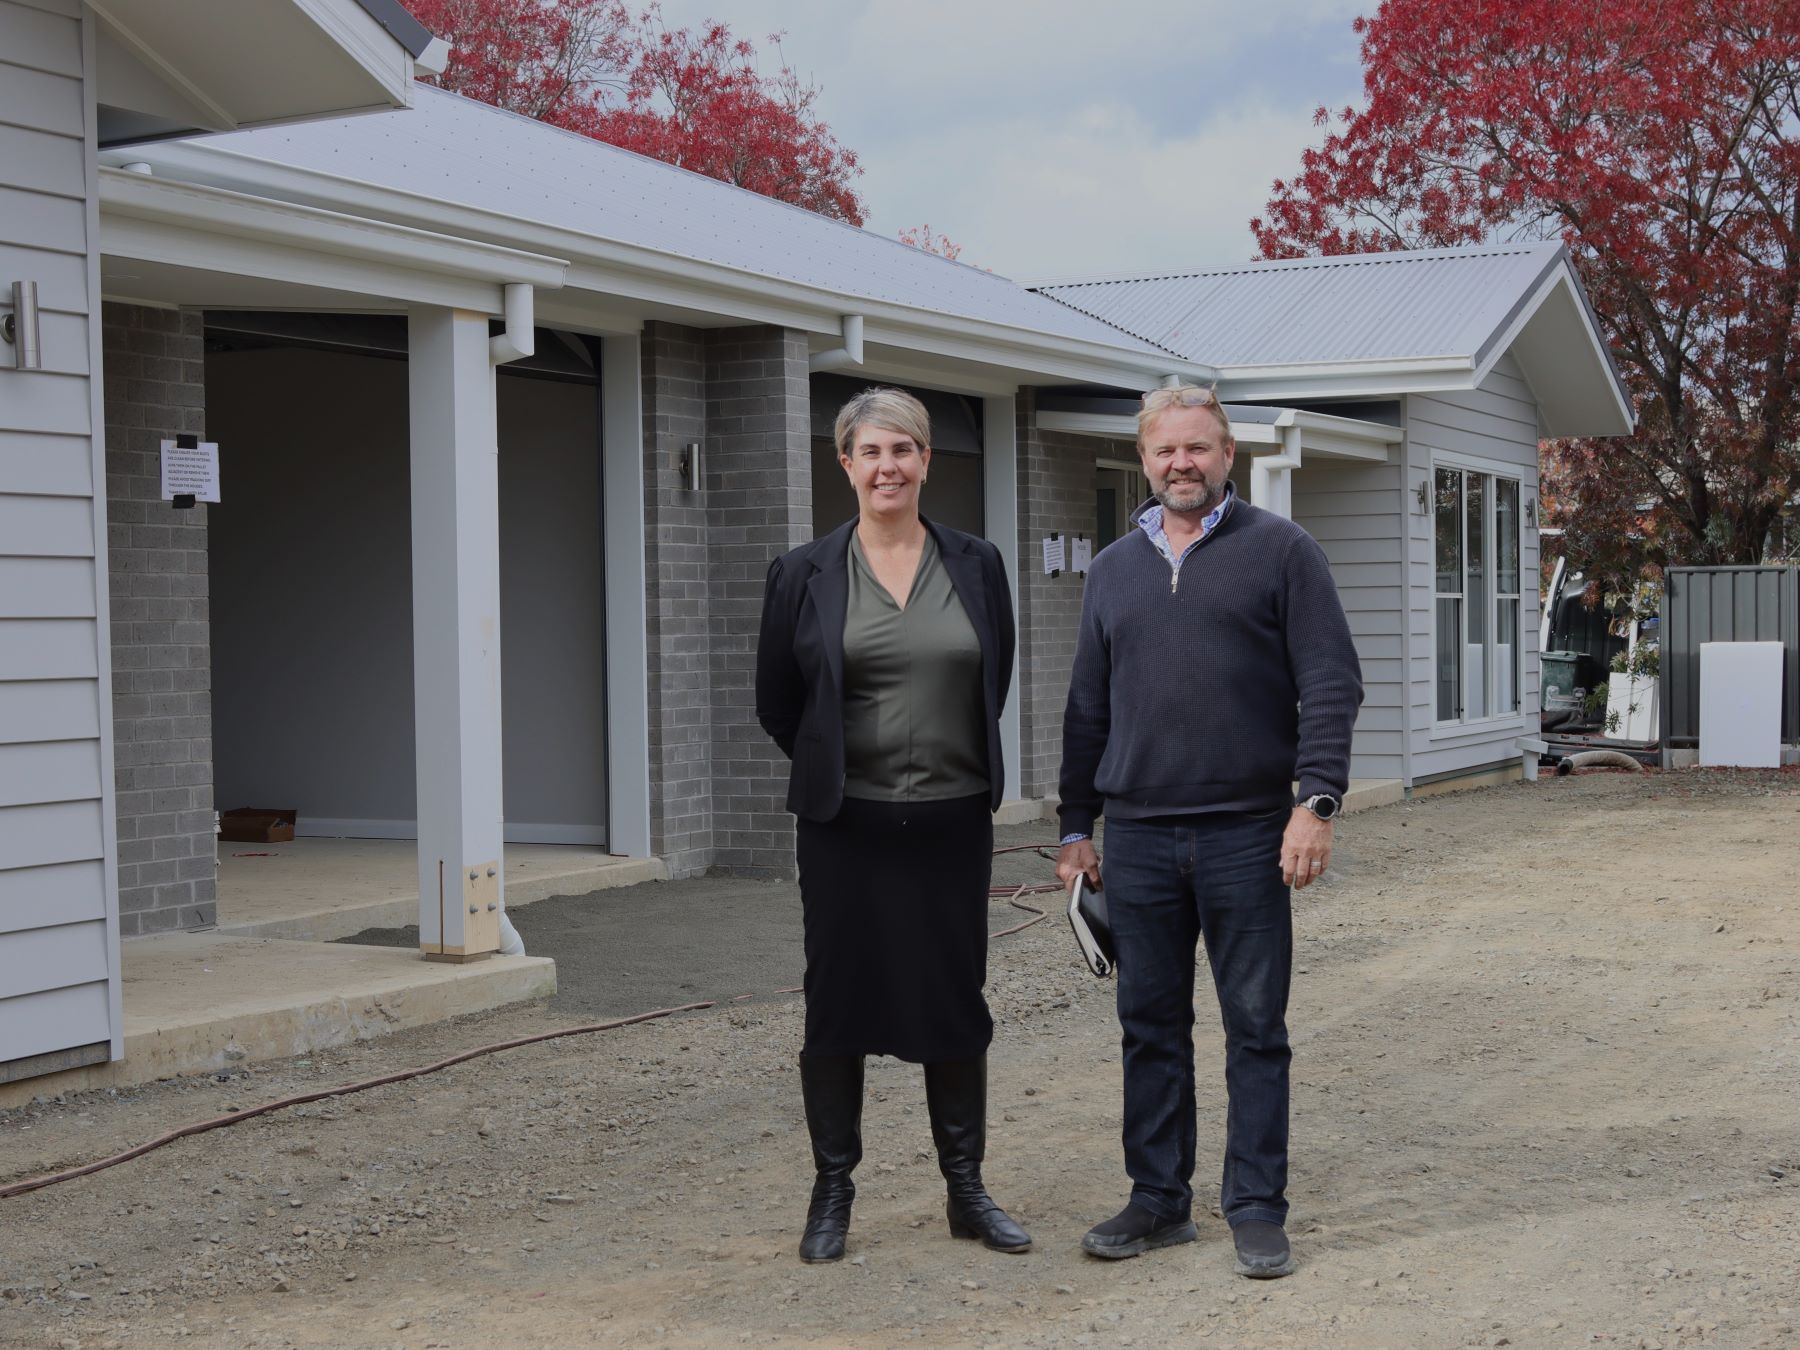 A woman and a aman stand outside newly built SDA homes. The homes are grey and there are brightly coloured red autumn trees in the background behind them.